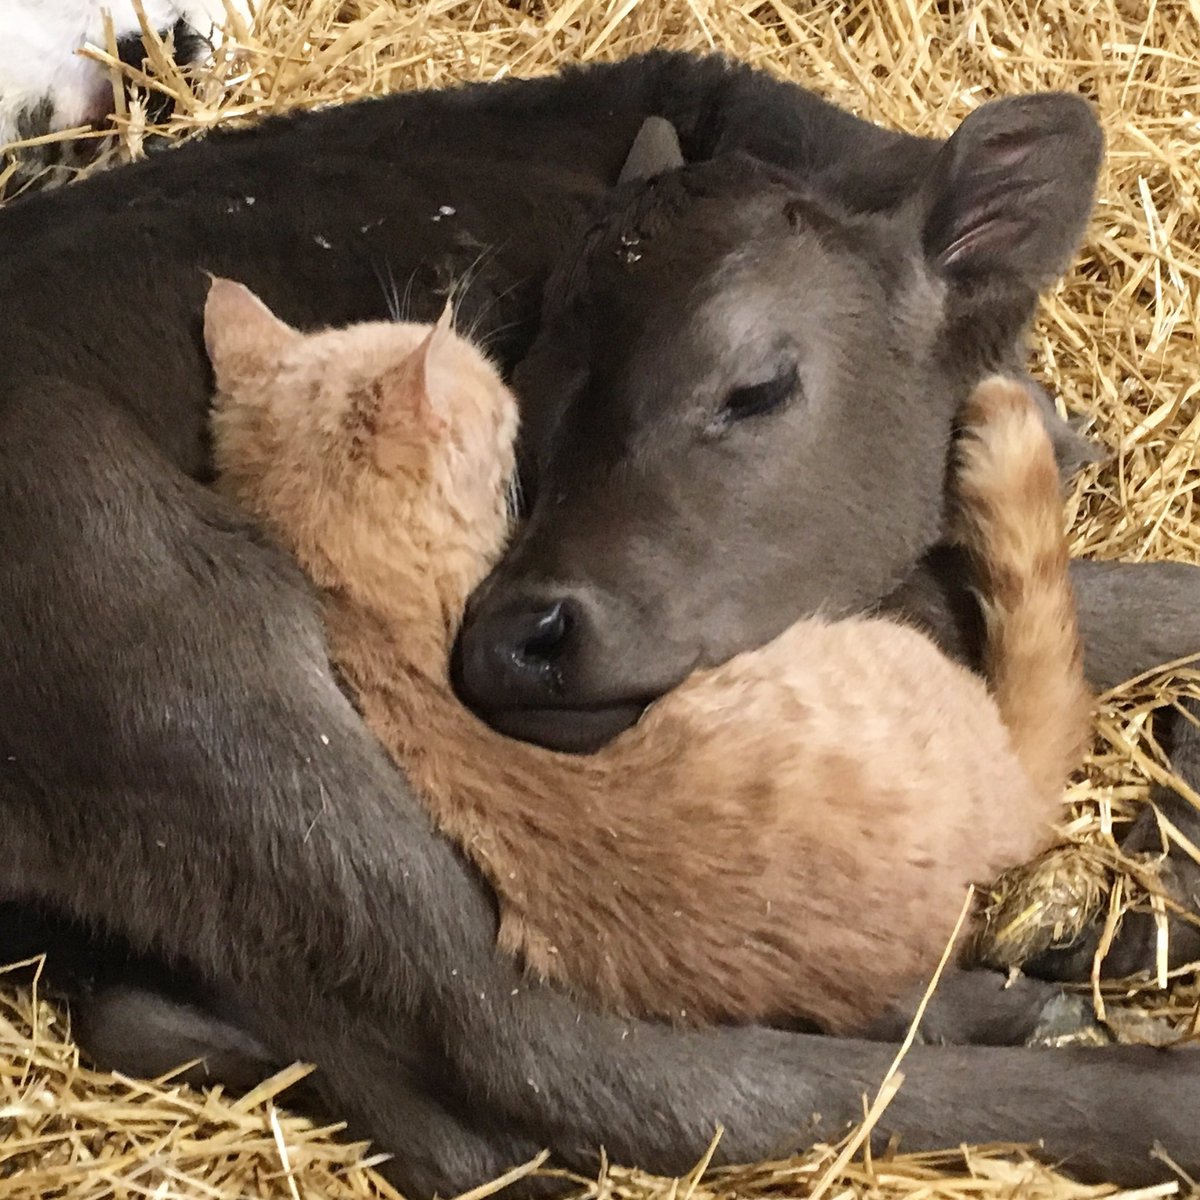 In case your Monday needs a little 😍.

#farmlove #snuggle #brightspots